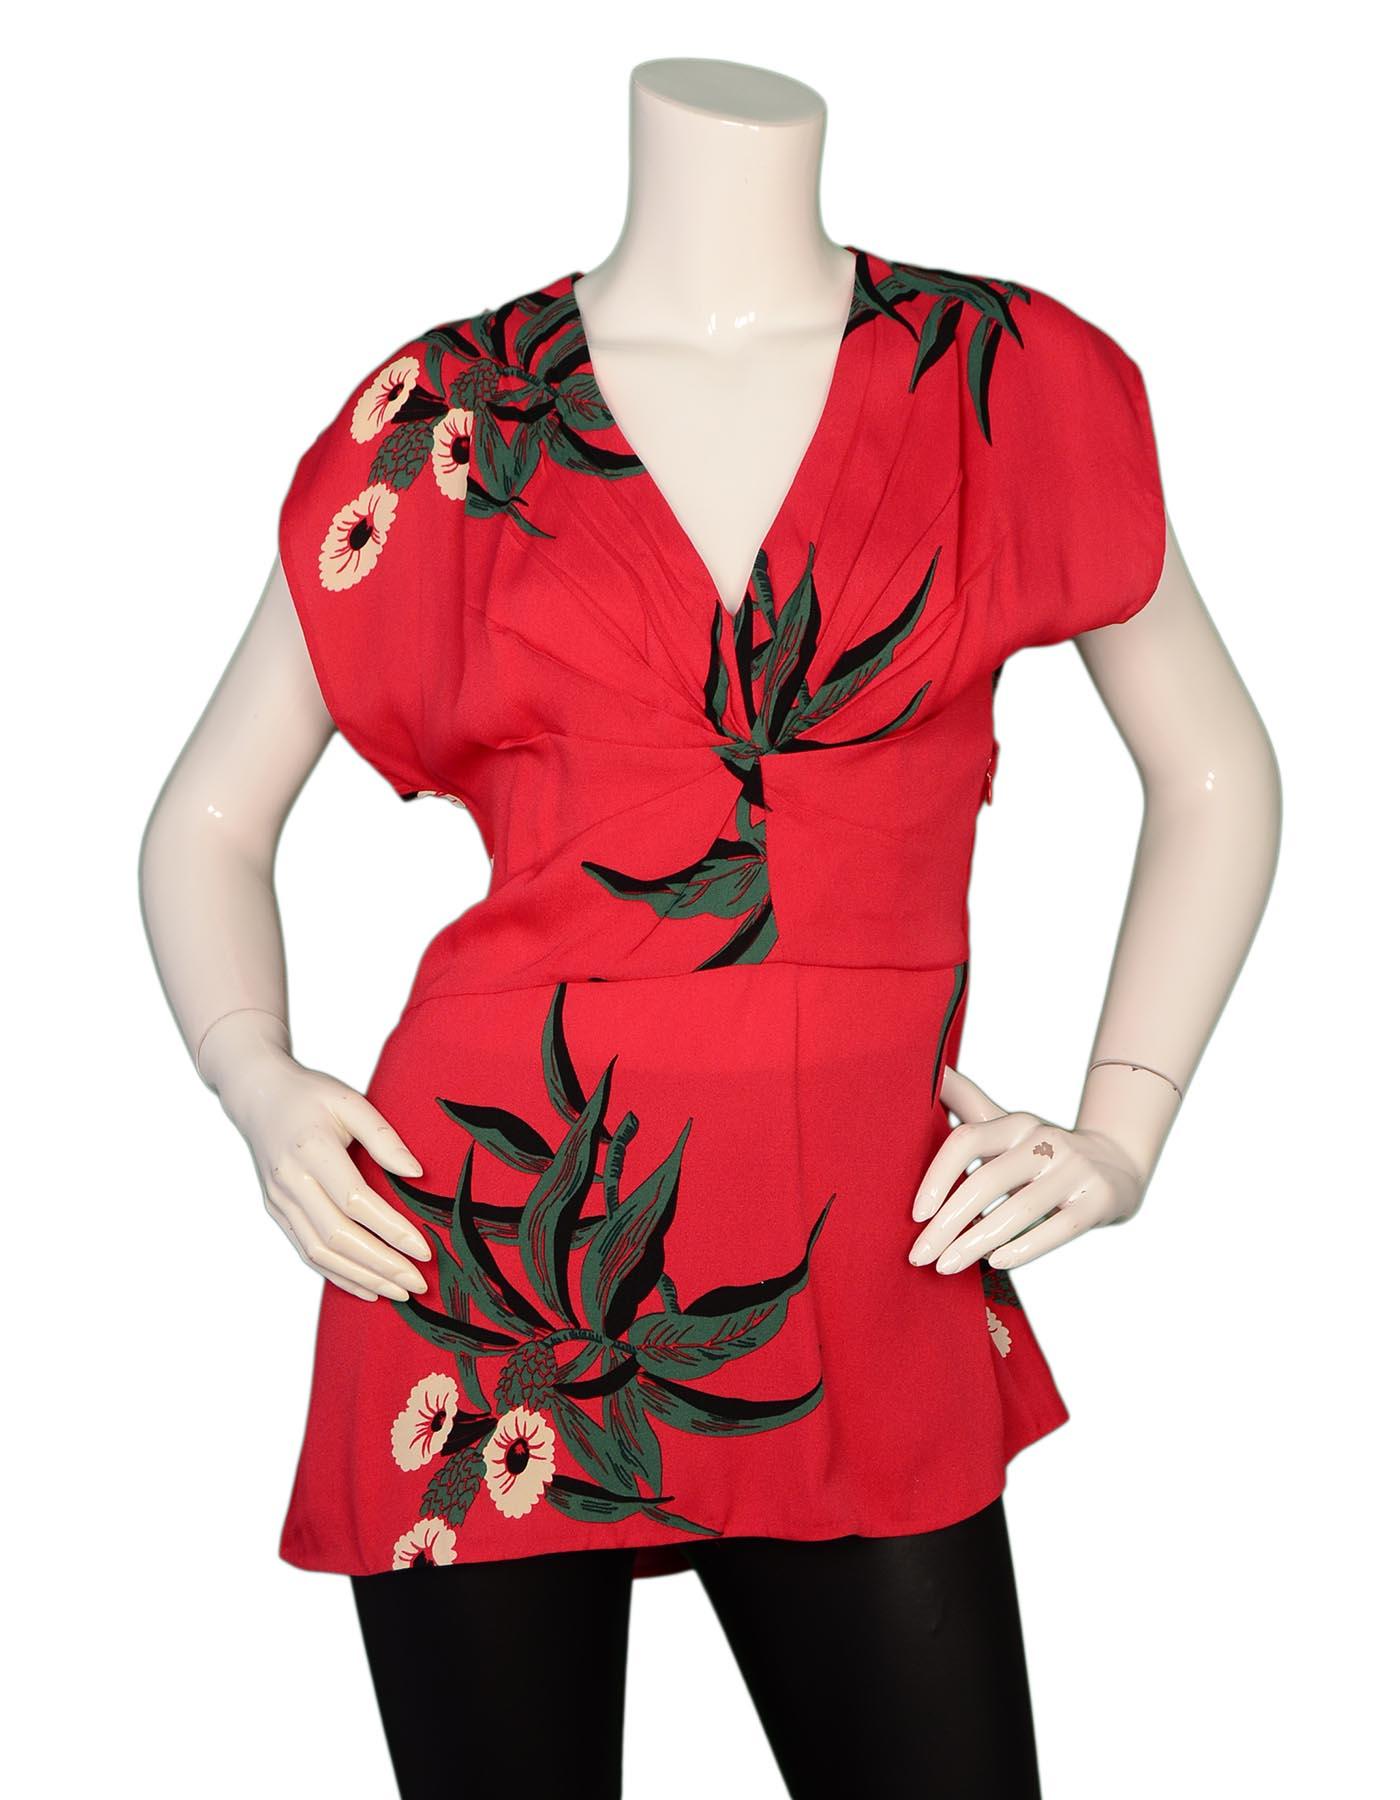 Marni NWT Red V Neck Sleeveless Top W/ Tropical Flowers Sz 42

Made In: Italy
Color: Red, green, cream
Materials: 100% viscose
Opening/Closure: Hidden side zipper
Overall Condition: Excellent condition with original tags attached, with exception of